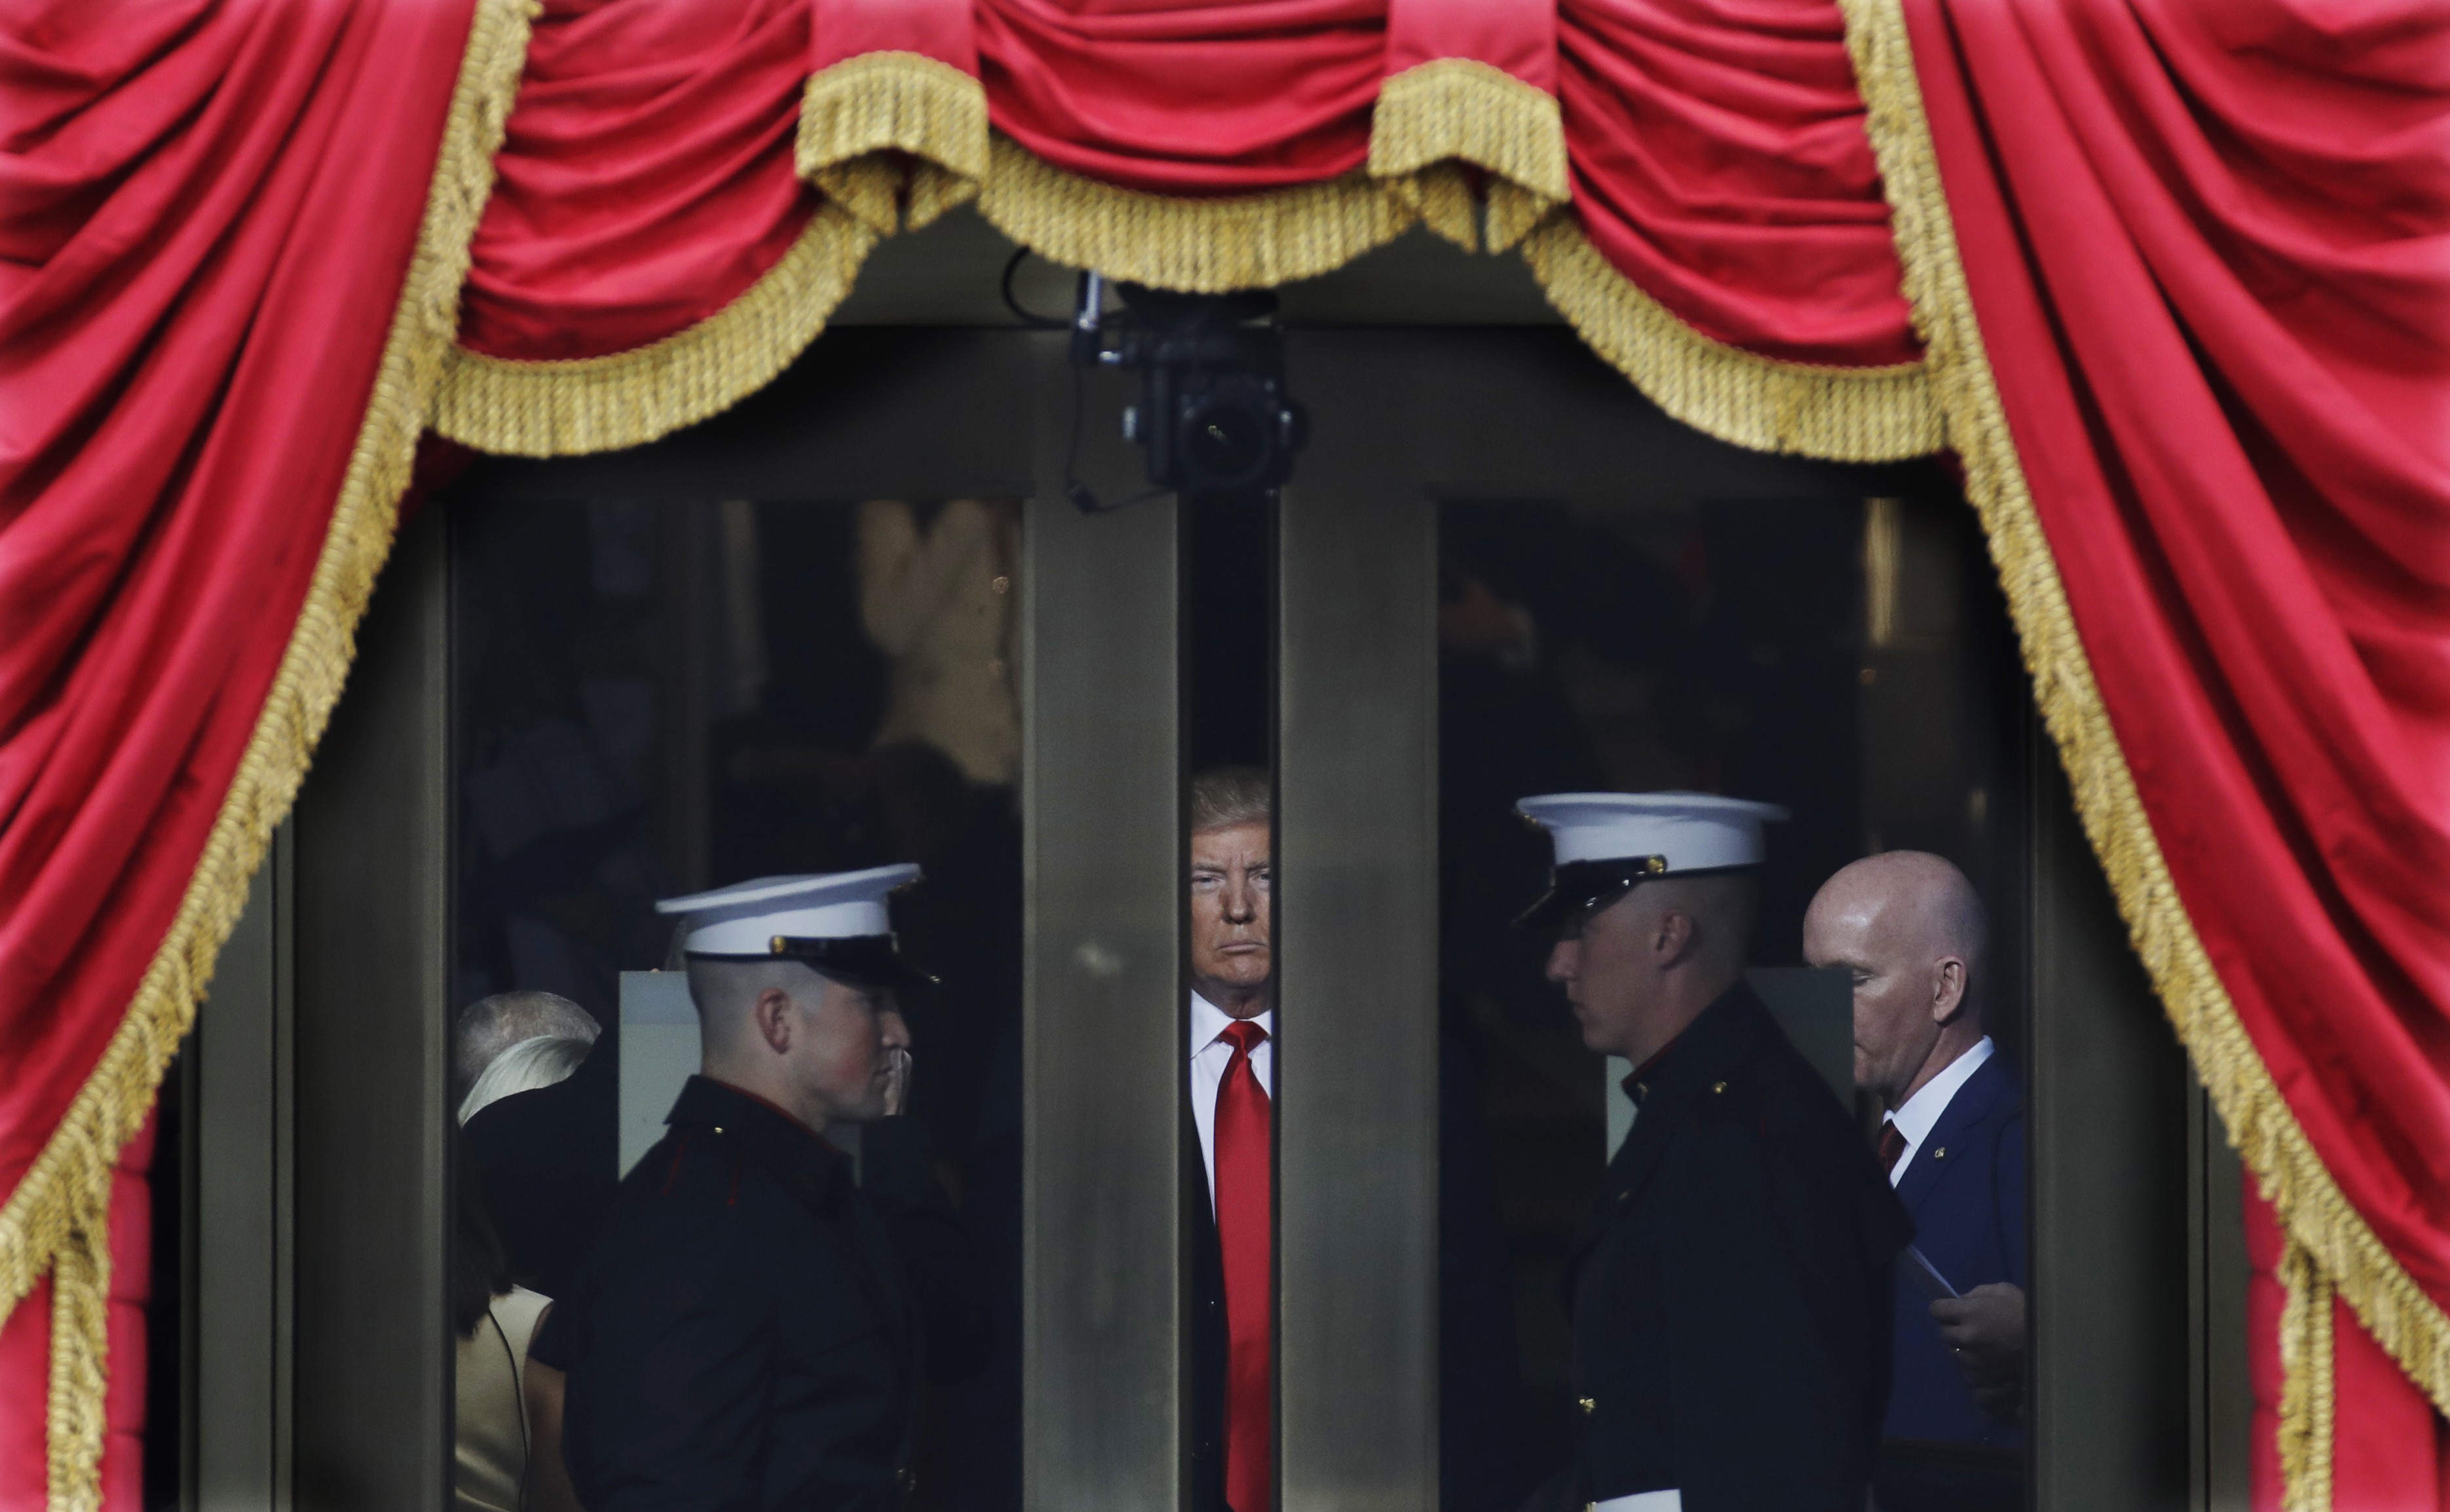 In this January 20, 2017 file photo, then president-elect Donald Trump waits to step out onto the portico for his Presidential Inauguration at the US Capitol in Washington. Photo: AP